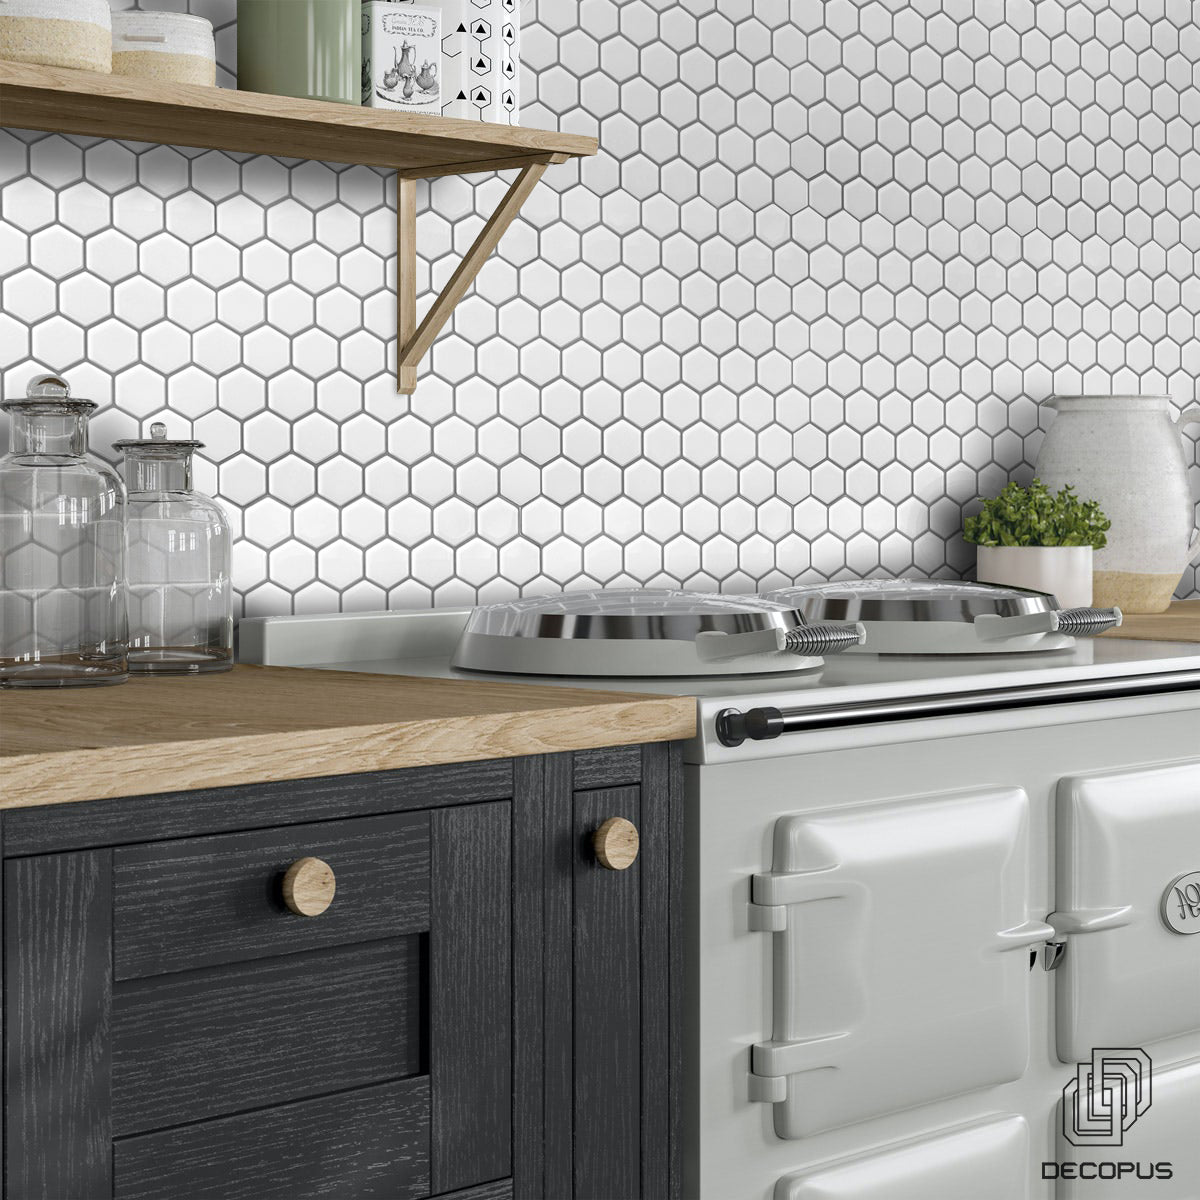 Decopus 3D MarbleTile Backsplash Peel and Stick Vinyl (Hexagon - Mono White 10pc/Pack) for Kitchen & Bathroom with Marble Printing